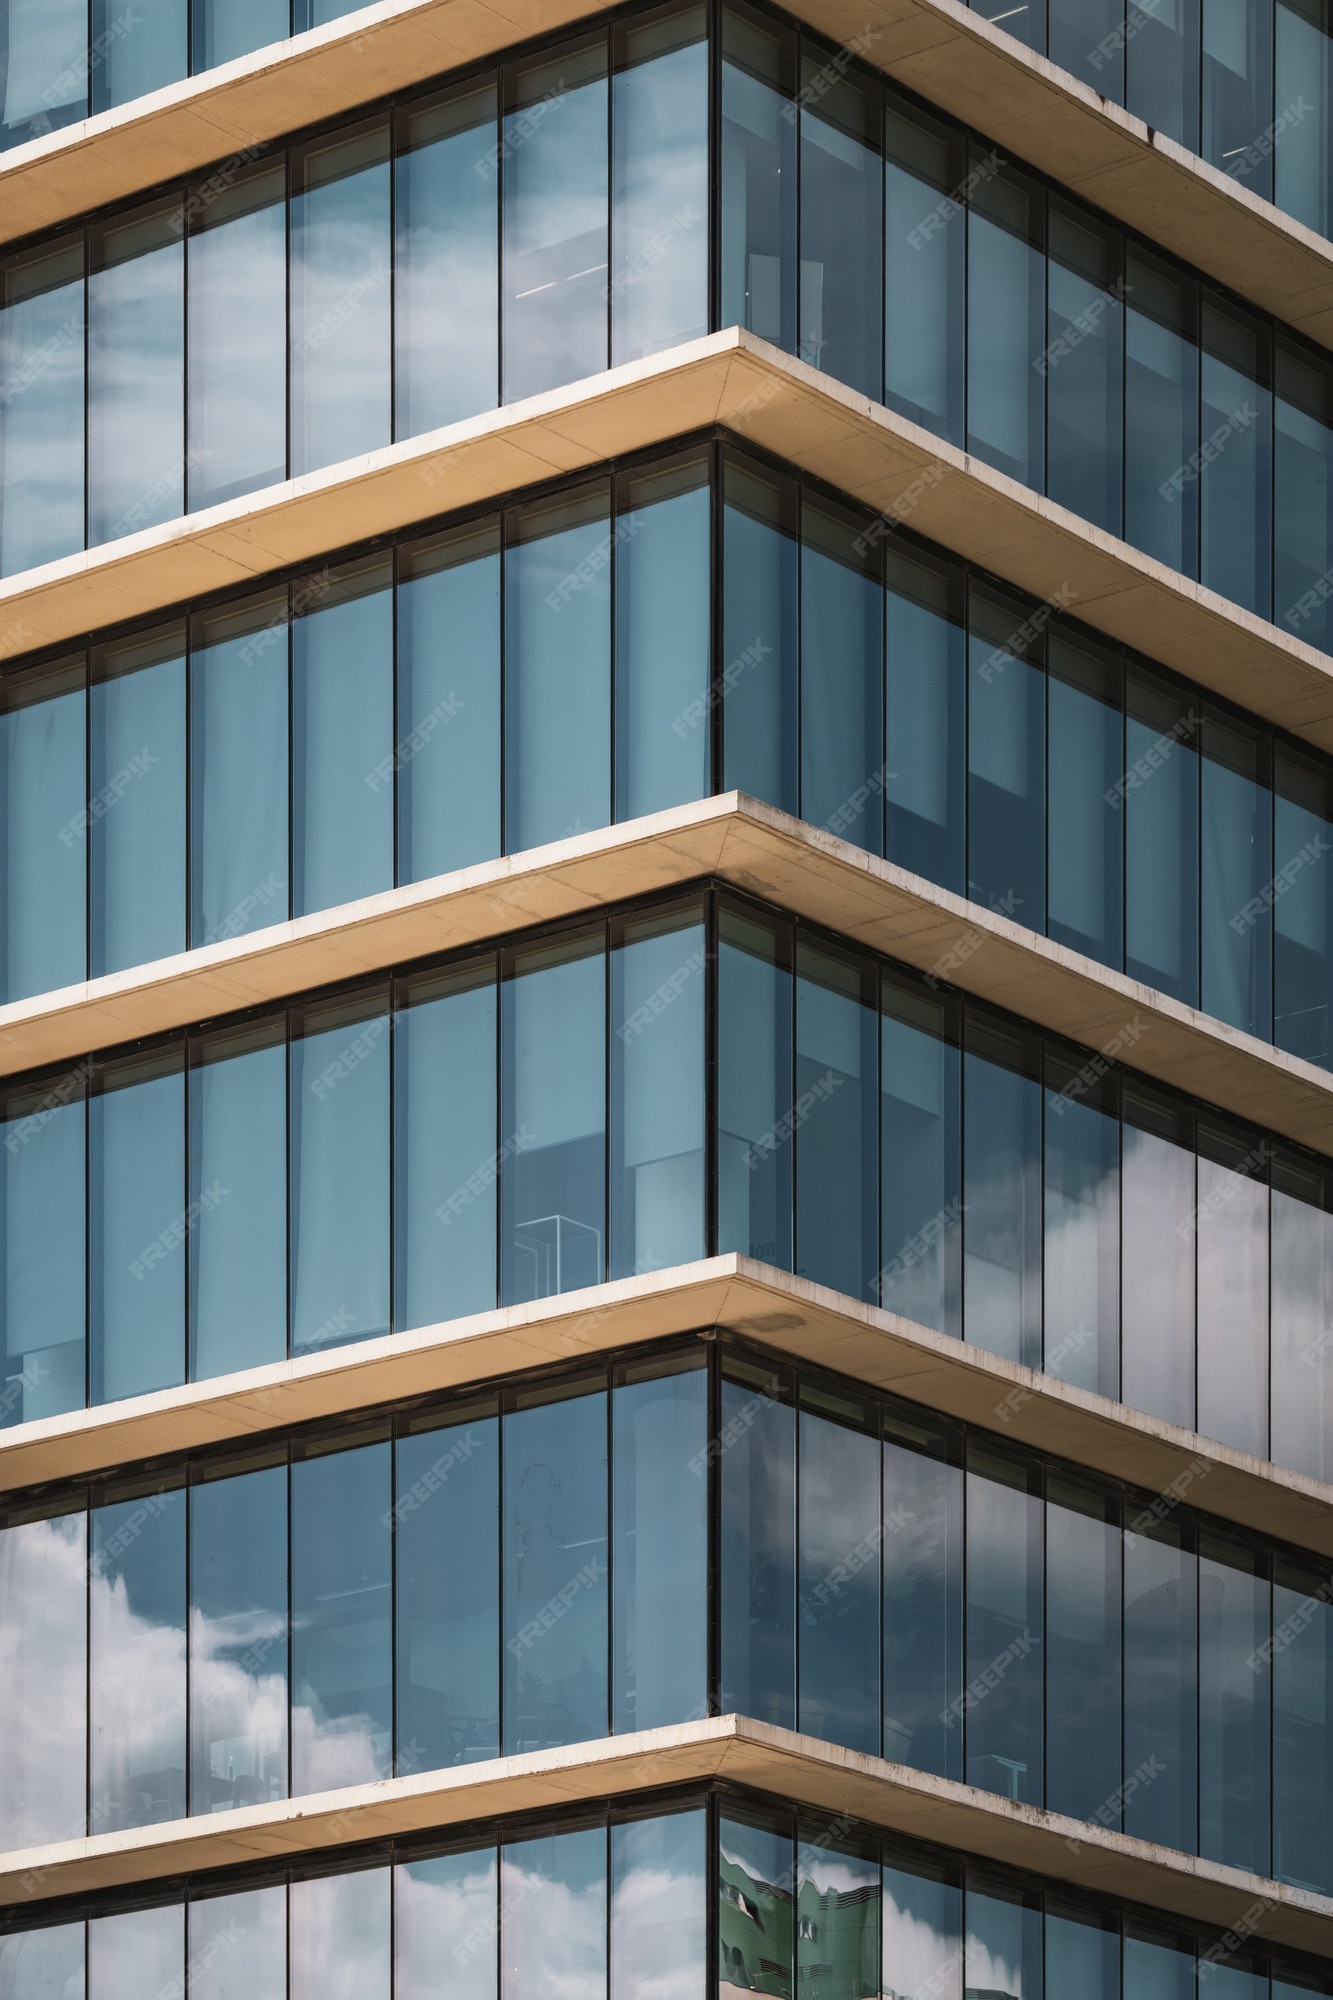 Premium Photo | Symmetrical view of the corner of an office building with  vertical glazed windows